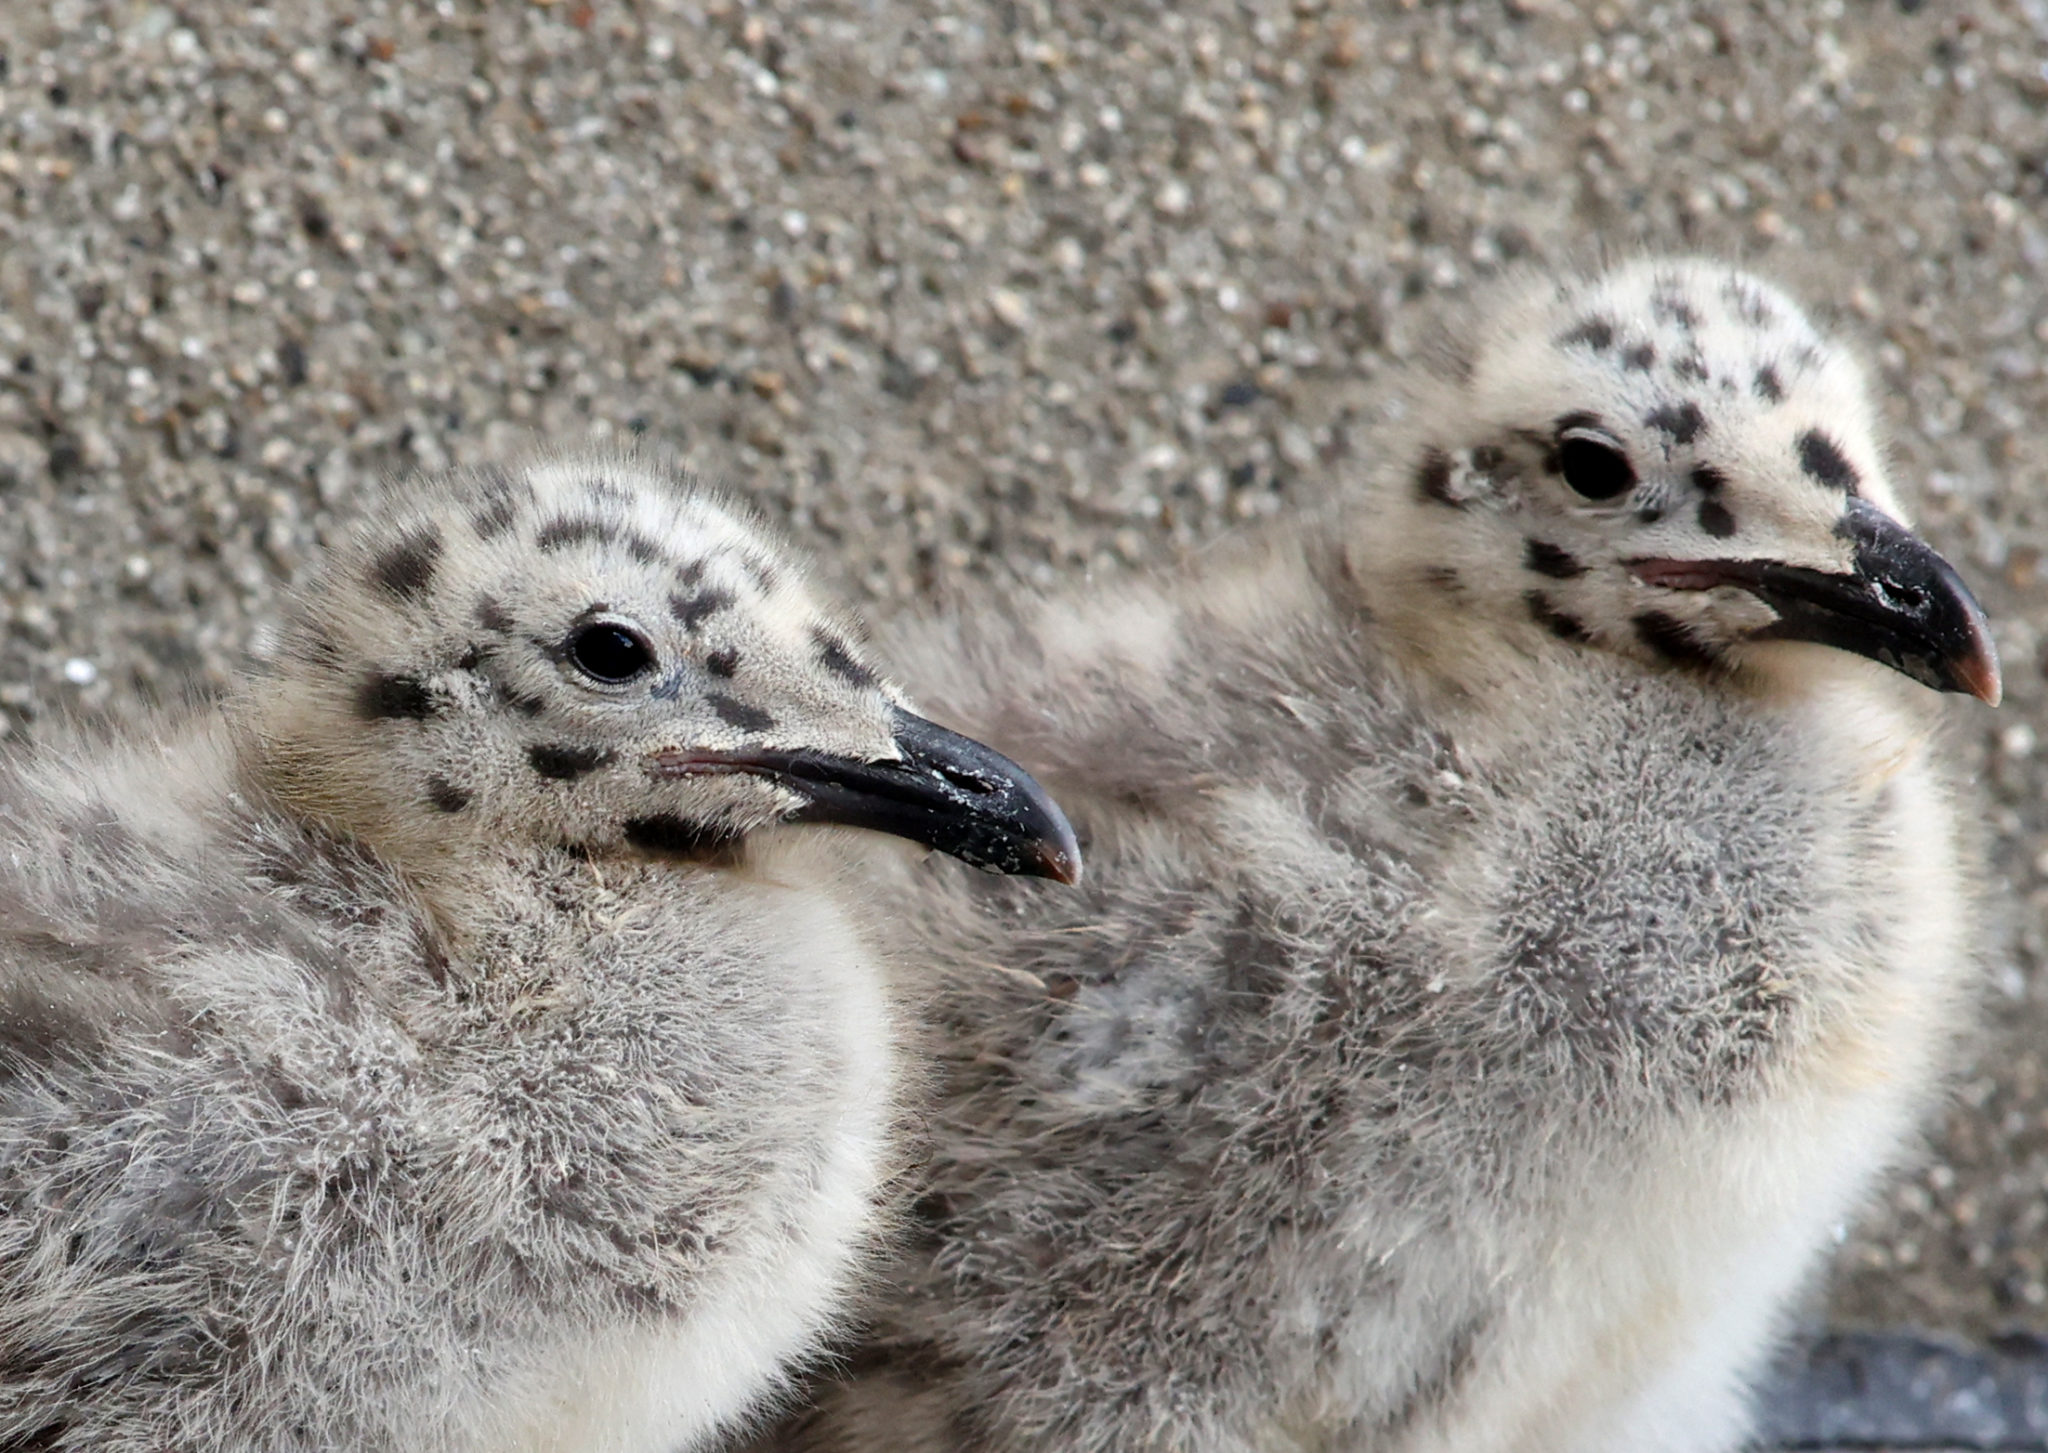 Baby Seagulls emerge from their nest on the side of a building in Dublin City Centre